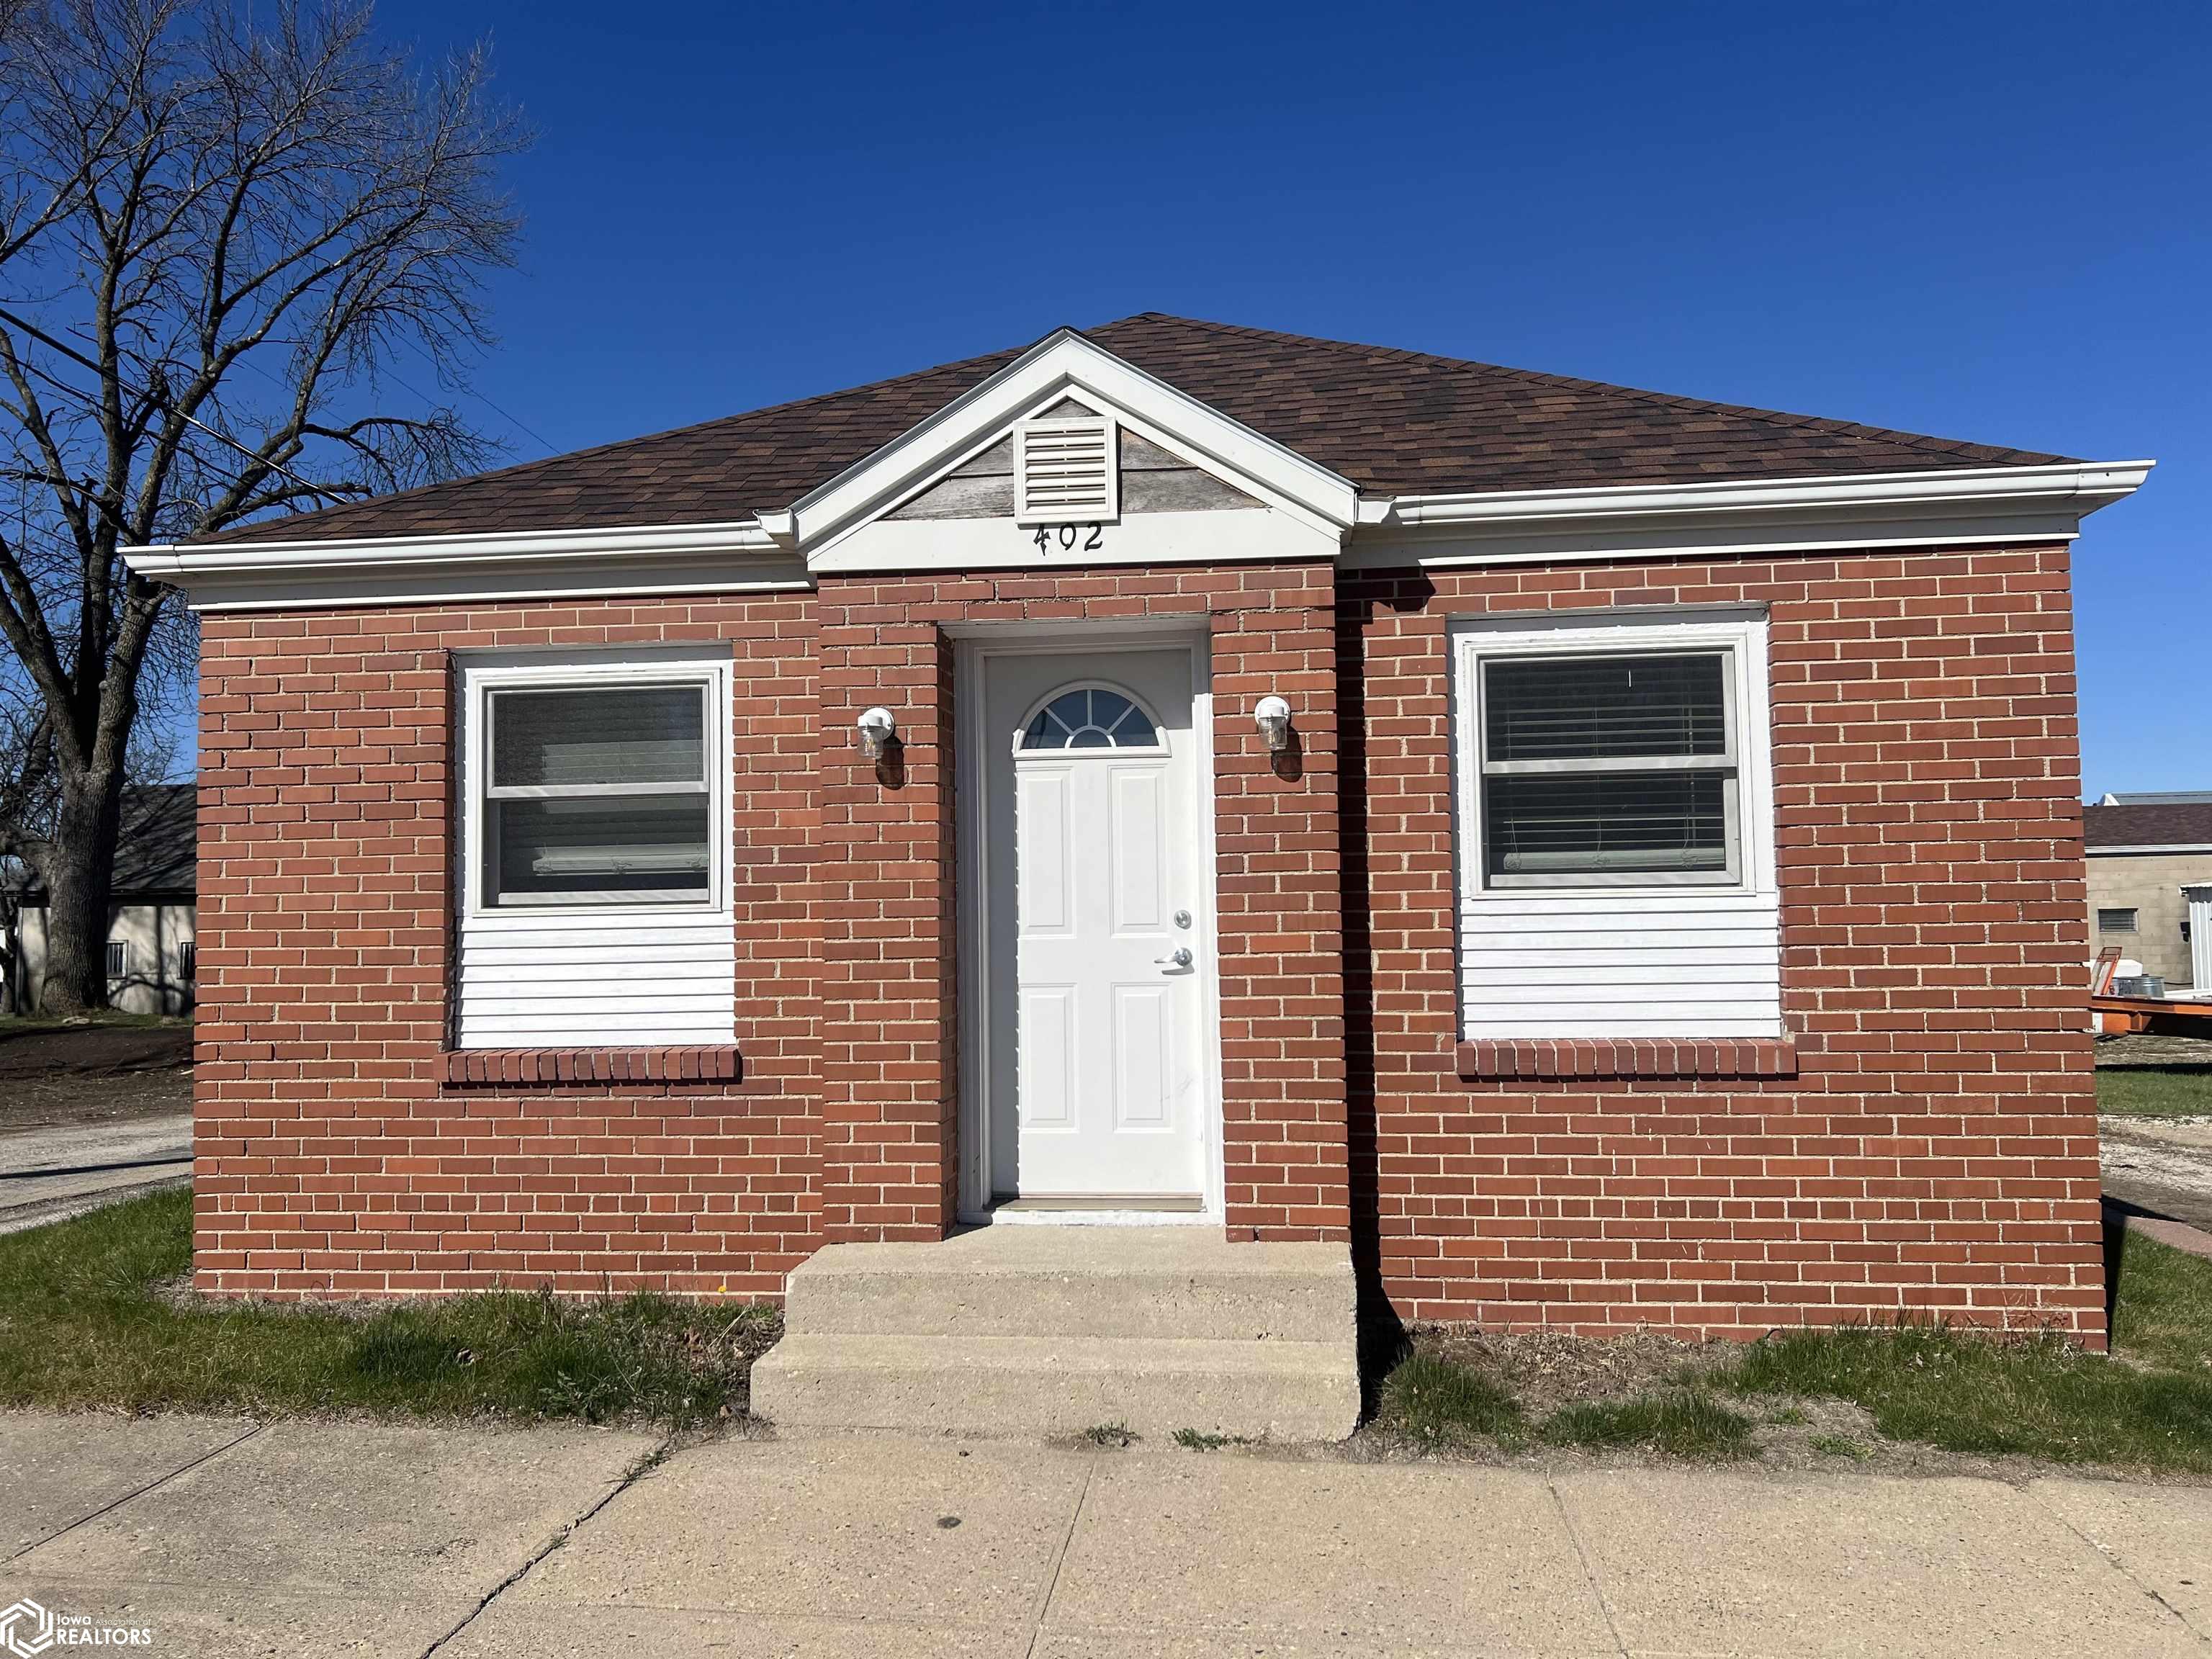 402 4th St., Livermore, Iowa 50558, ,1 BathroomBathrooms,Single Family,For Sale,4th St.,6316415